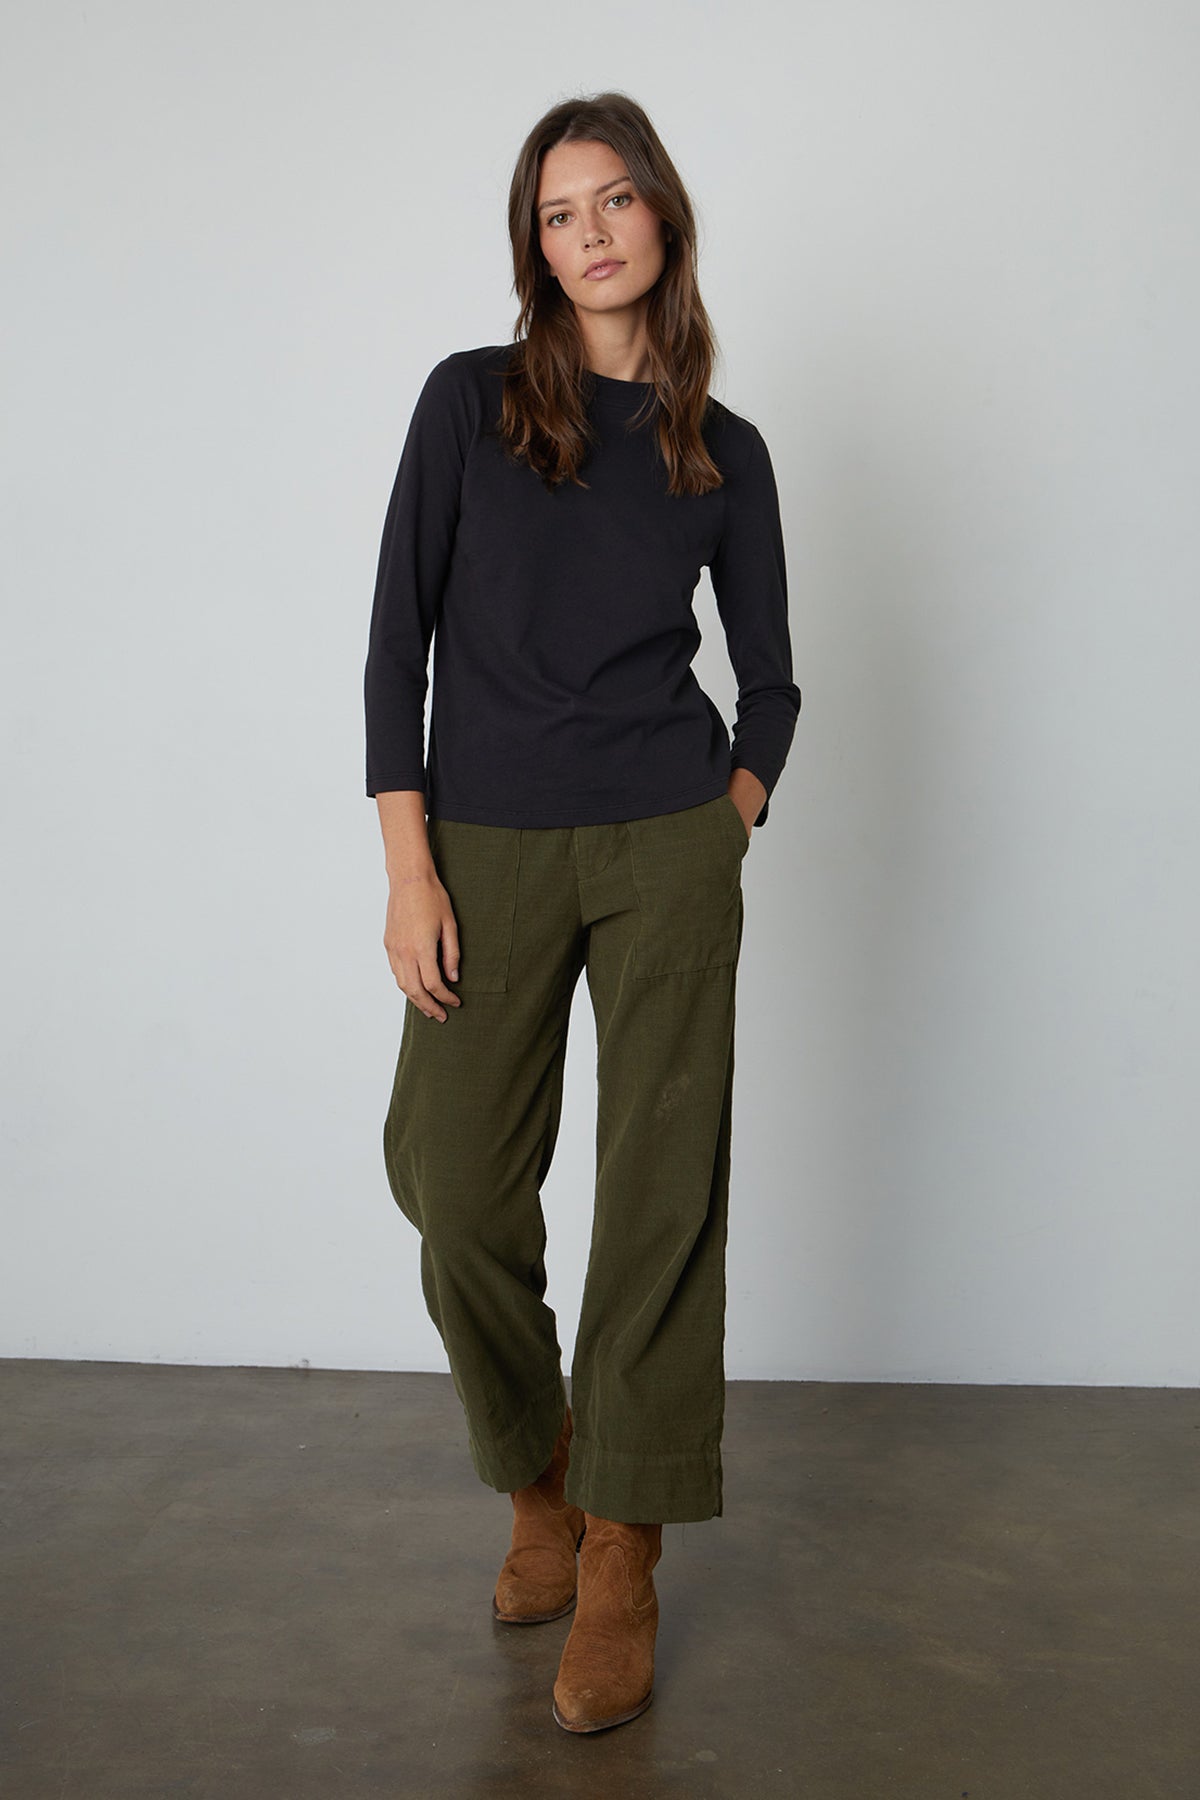 Vera Corduroy Wide Leg Pant in dark green dillweed with Quinny Tee in black front-26654355062977